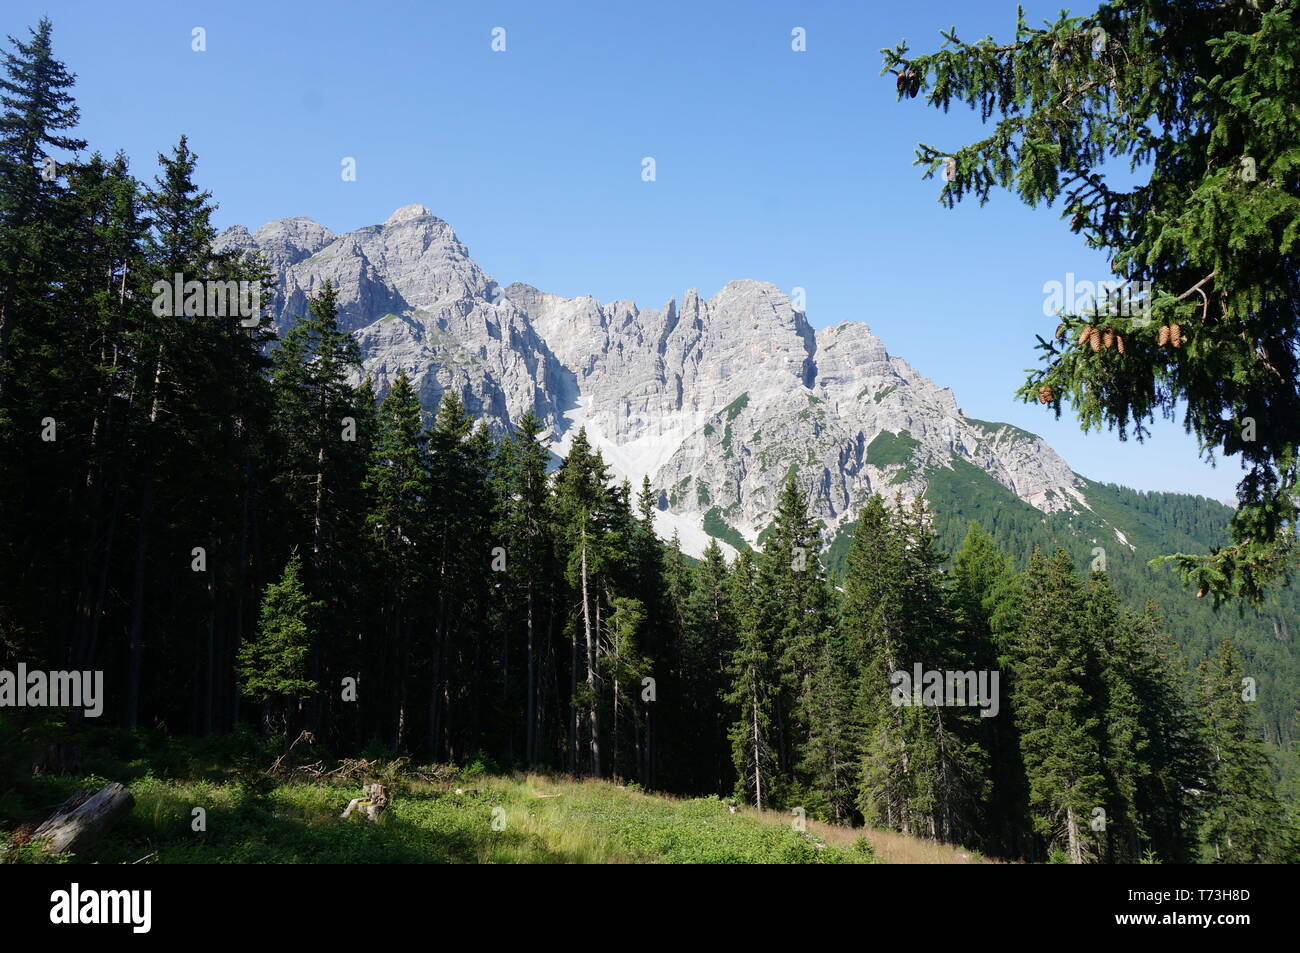 A typical alpine view with rocky mountains, green meadows and deep forests. Austrian Alps. Stock Photo